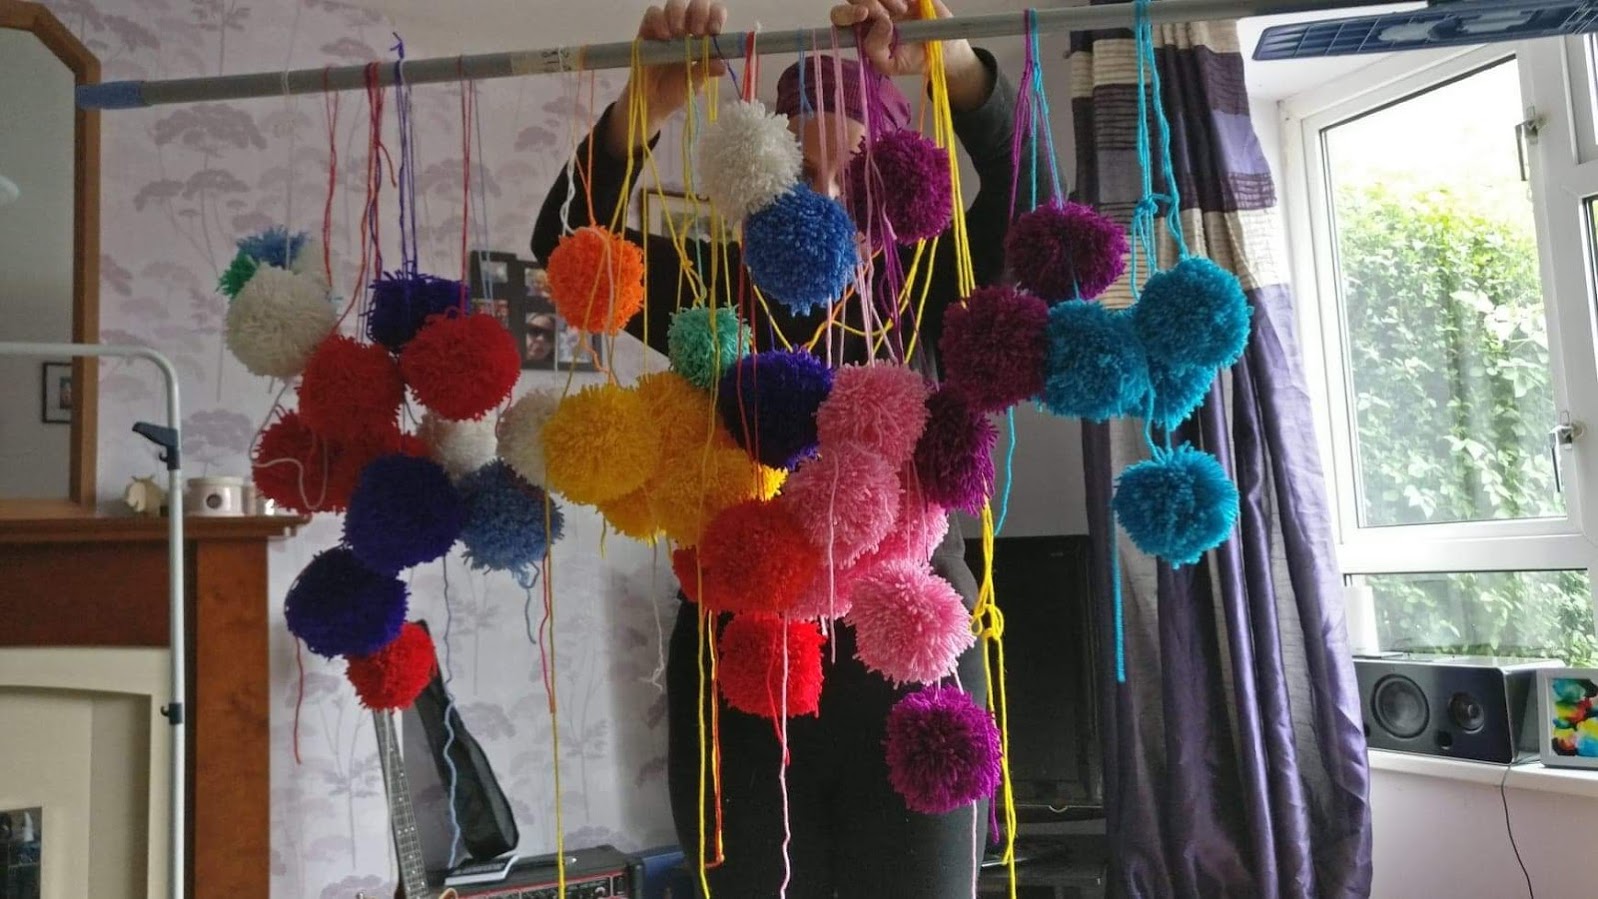 Tracy with many pompoms hanging from a broom handle